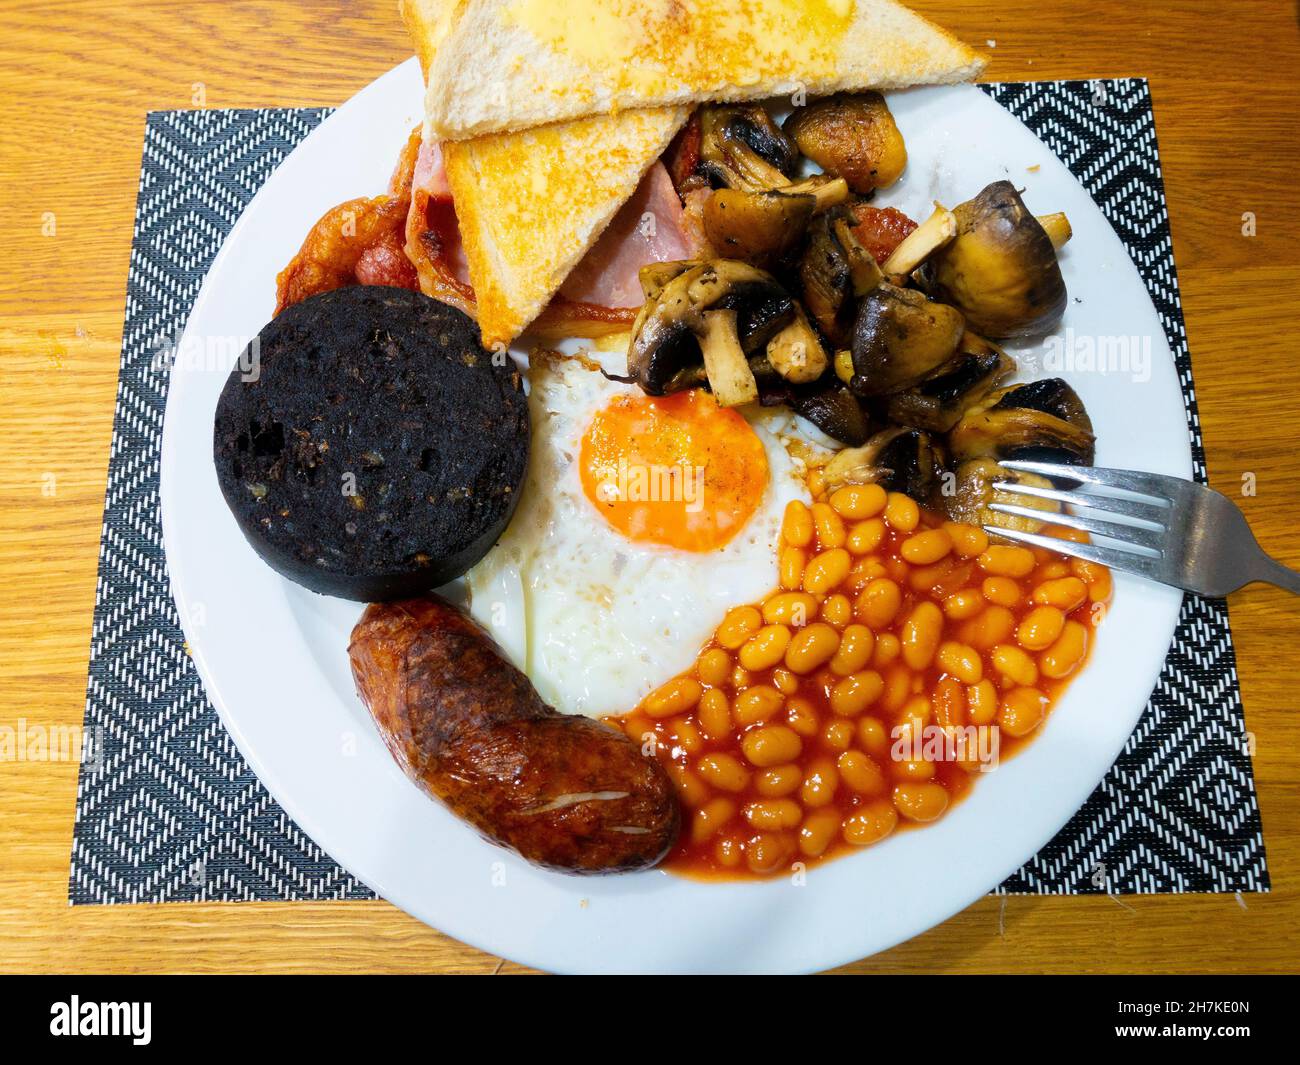 English farmhouse  Breakfast with well-done bacon fried egg sausages baked beans mushrooms and black pudding with white buttered toast Stock Photo